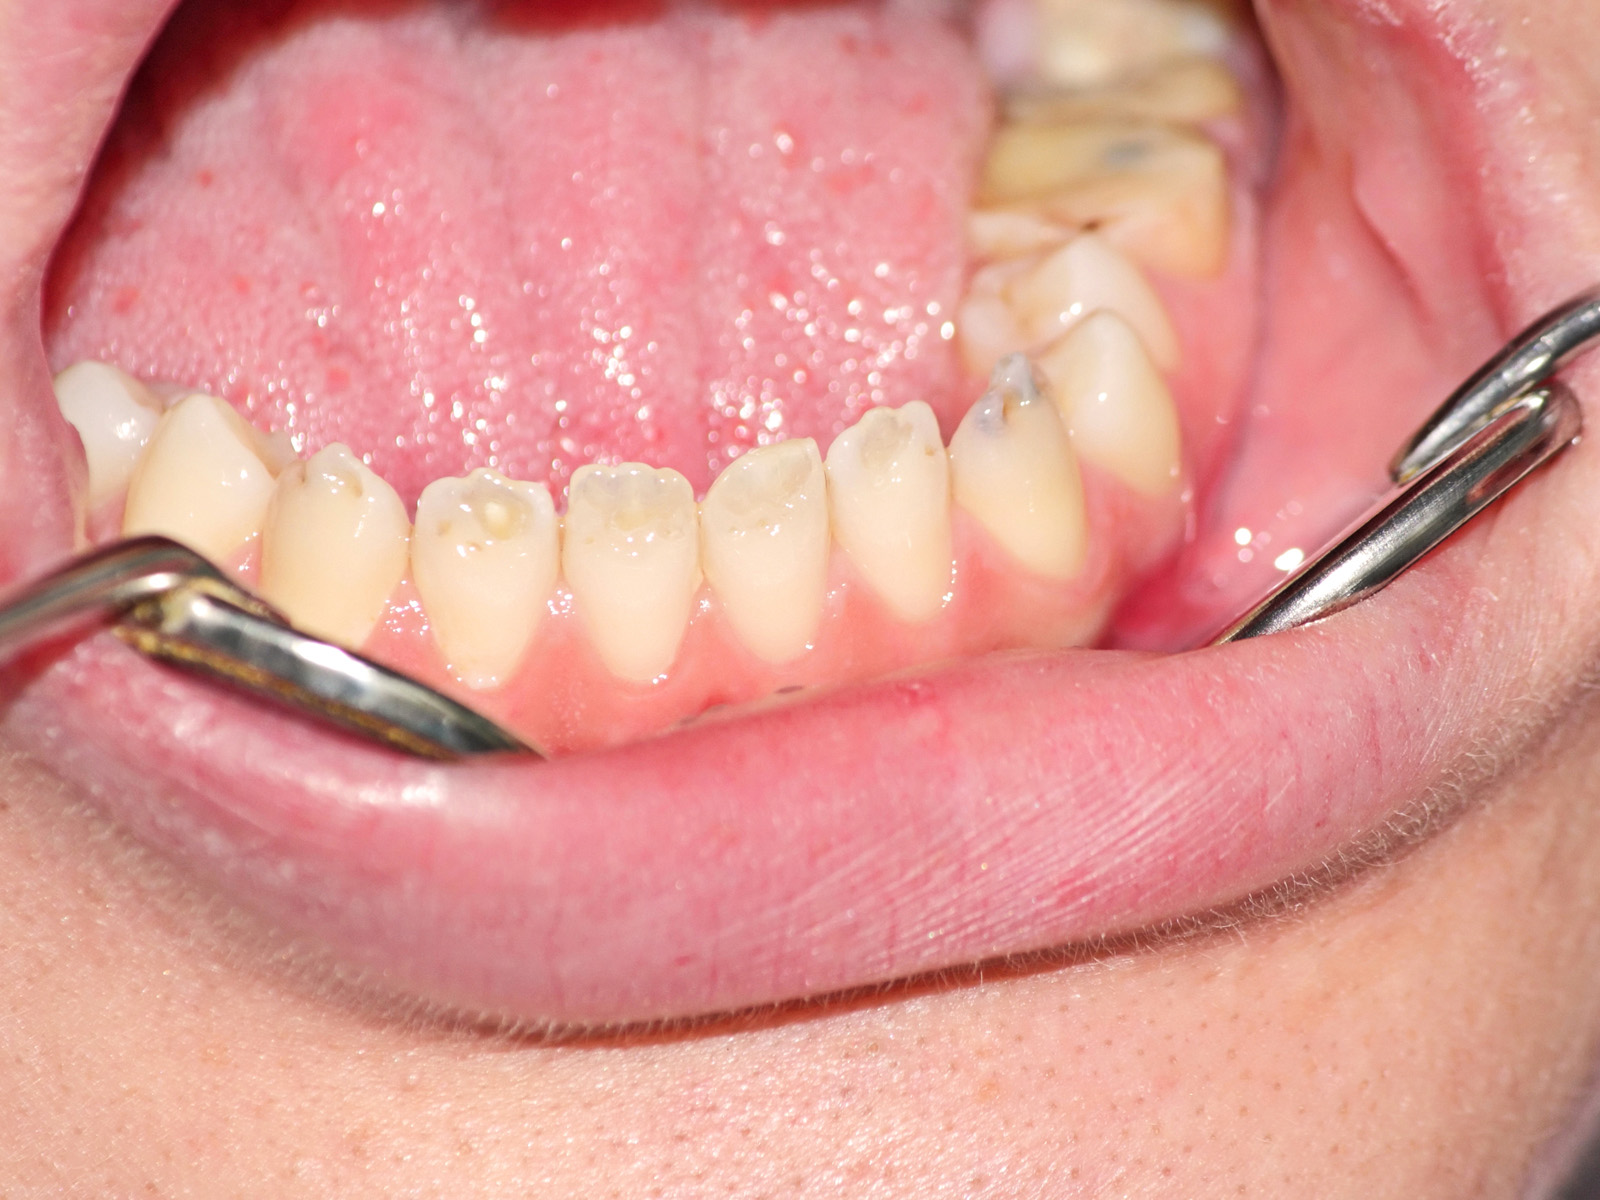 What Causes Chalky Teeth And How To Get Rid Of Them?